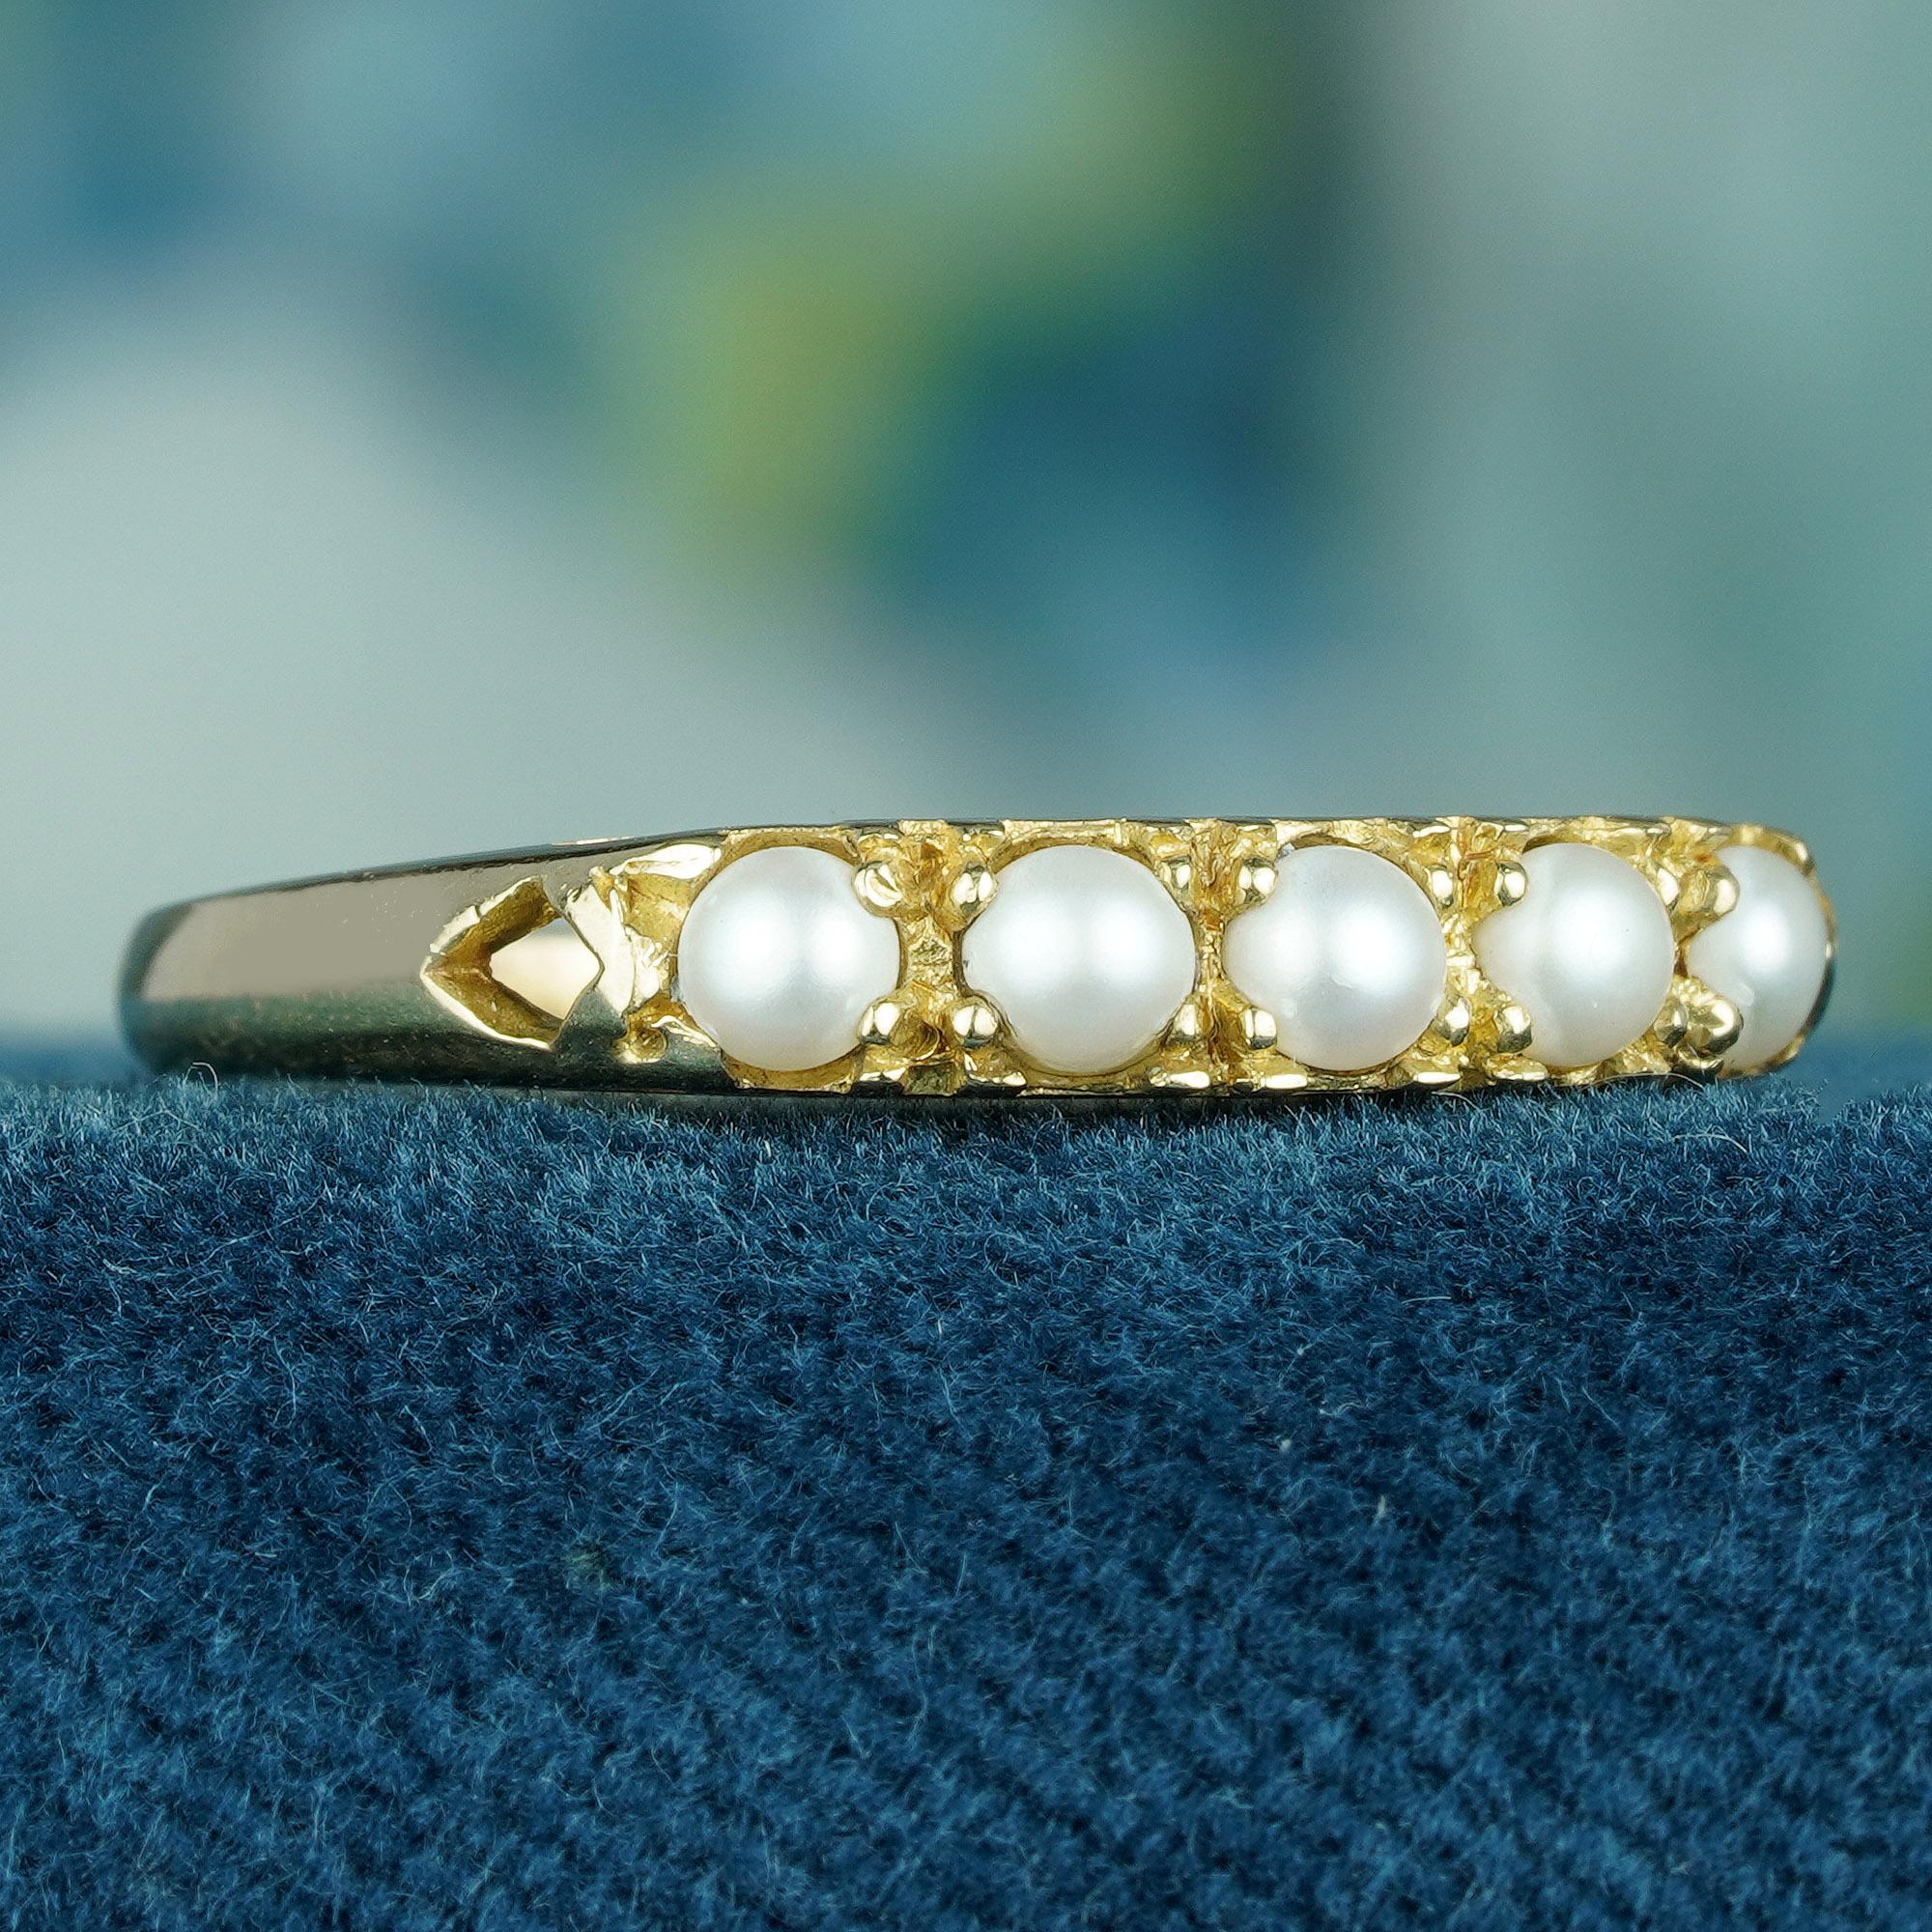 The ring showcases five round natural white pearls set in a solid yellow gold band, contributing to the vintage appeal of the piece. This classic and elegant jewelry is perfect for any occasion, offering versatility that allows it to be dressed up